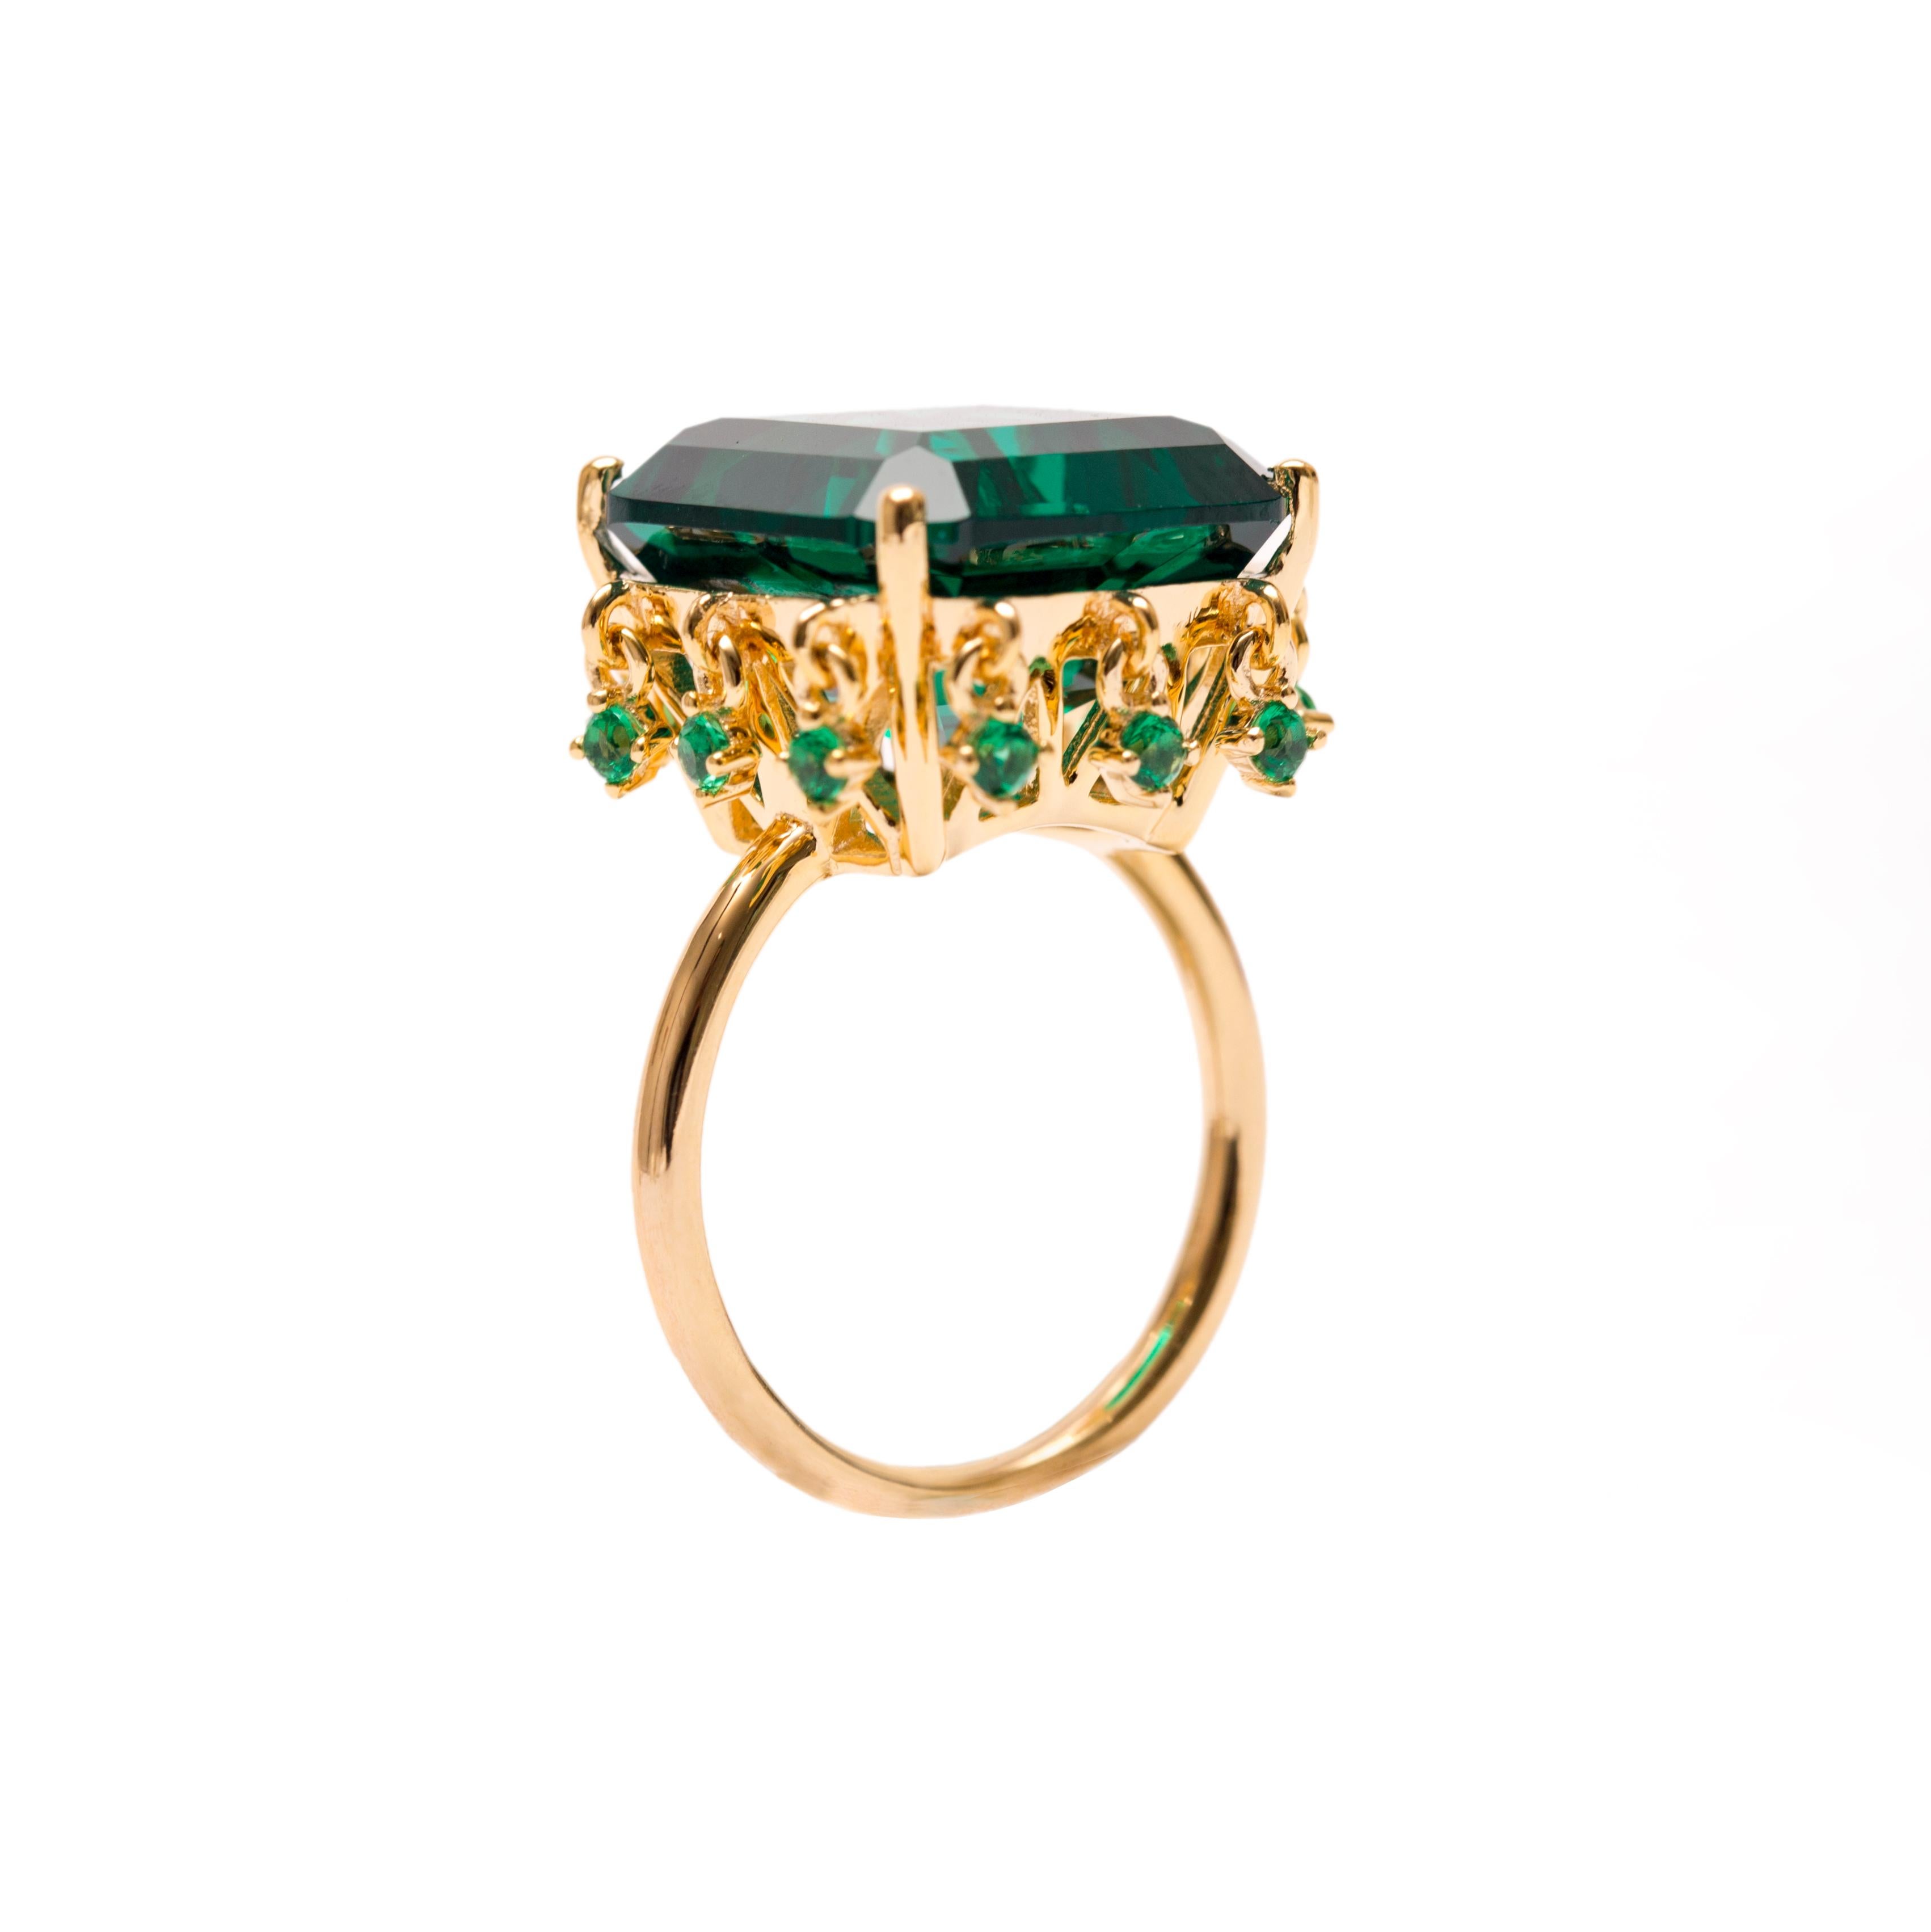 Part of our new Malikat = Queens collection- inspired by the ruling females of ancient Egypt. A dazzling ring to signify the queen's crown. Hand crafted vermeil gold with hand cut statement high grade emerald green color Cubic zircon and charm